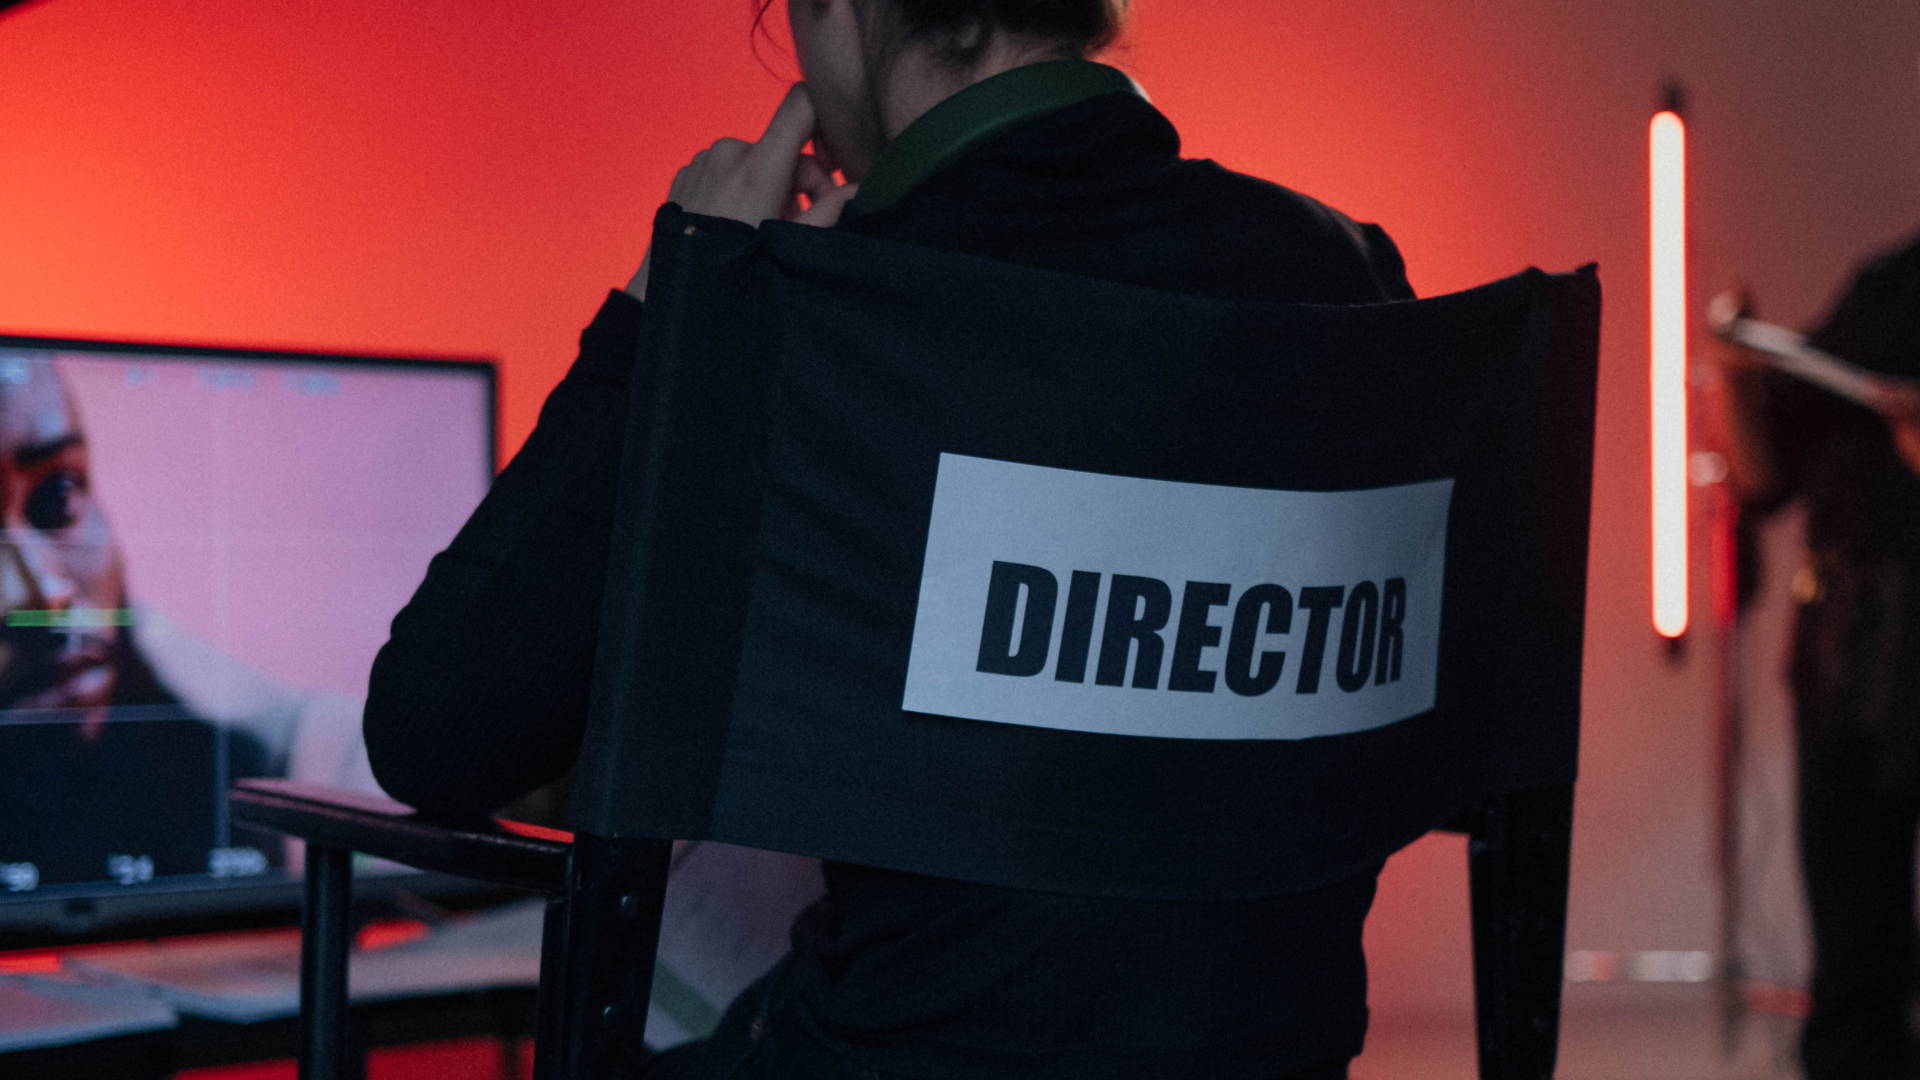 Learn to communicate effectively with directors on film sets by taking classes at The O.A. Training Studio. Online options for adults and teens 